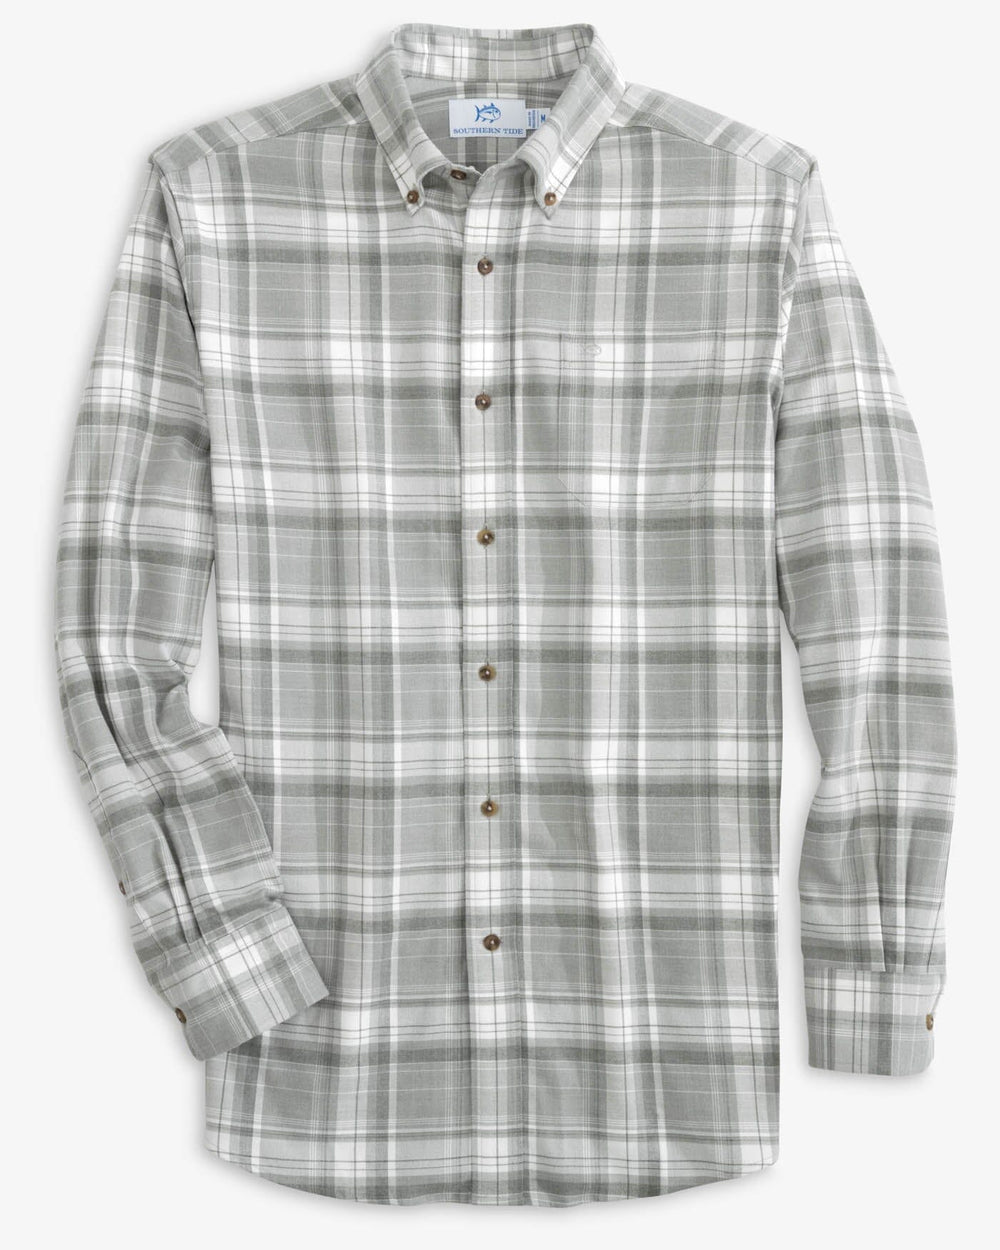 The front view of the Southern Tide Heather Avondale Plaid Sport Shirt by Southern Tide - Heather Ultimate Grey